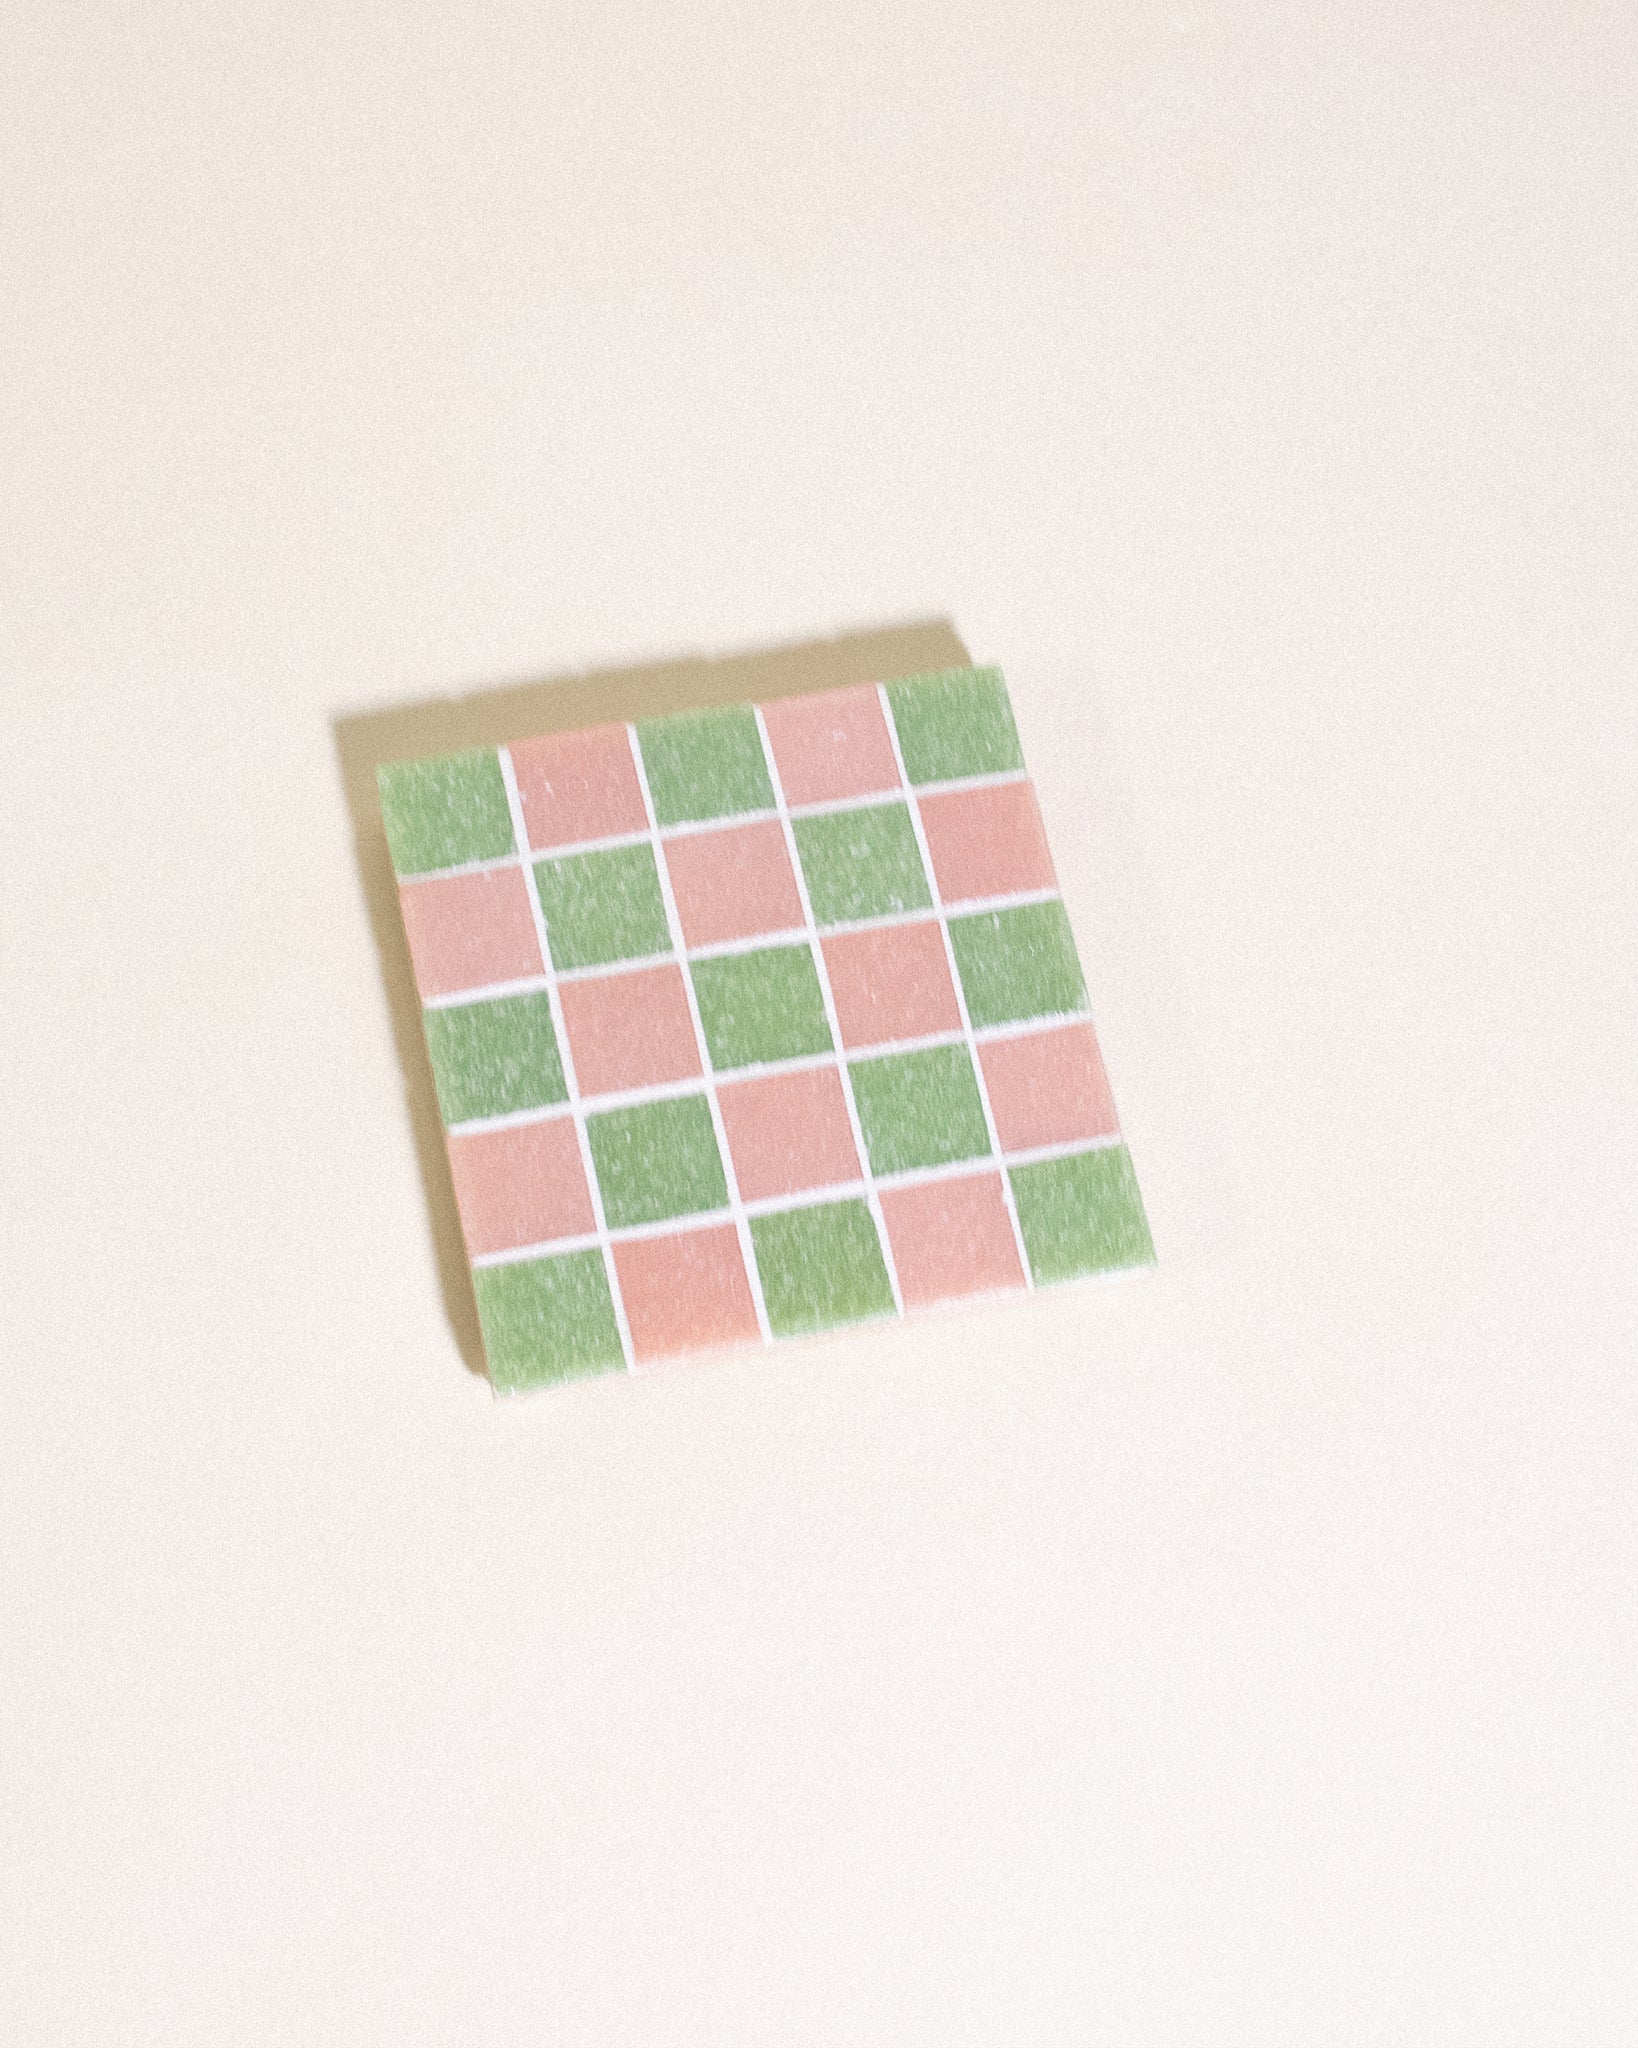 GLASS TILE COASTER - Sour Patch Candy - 09